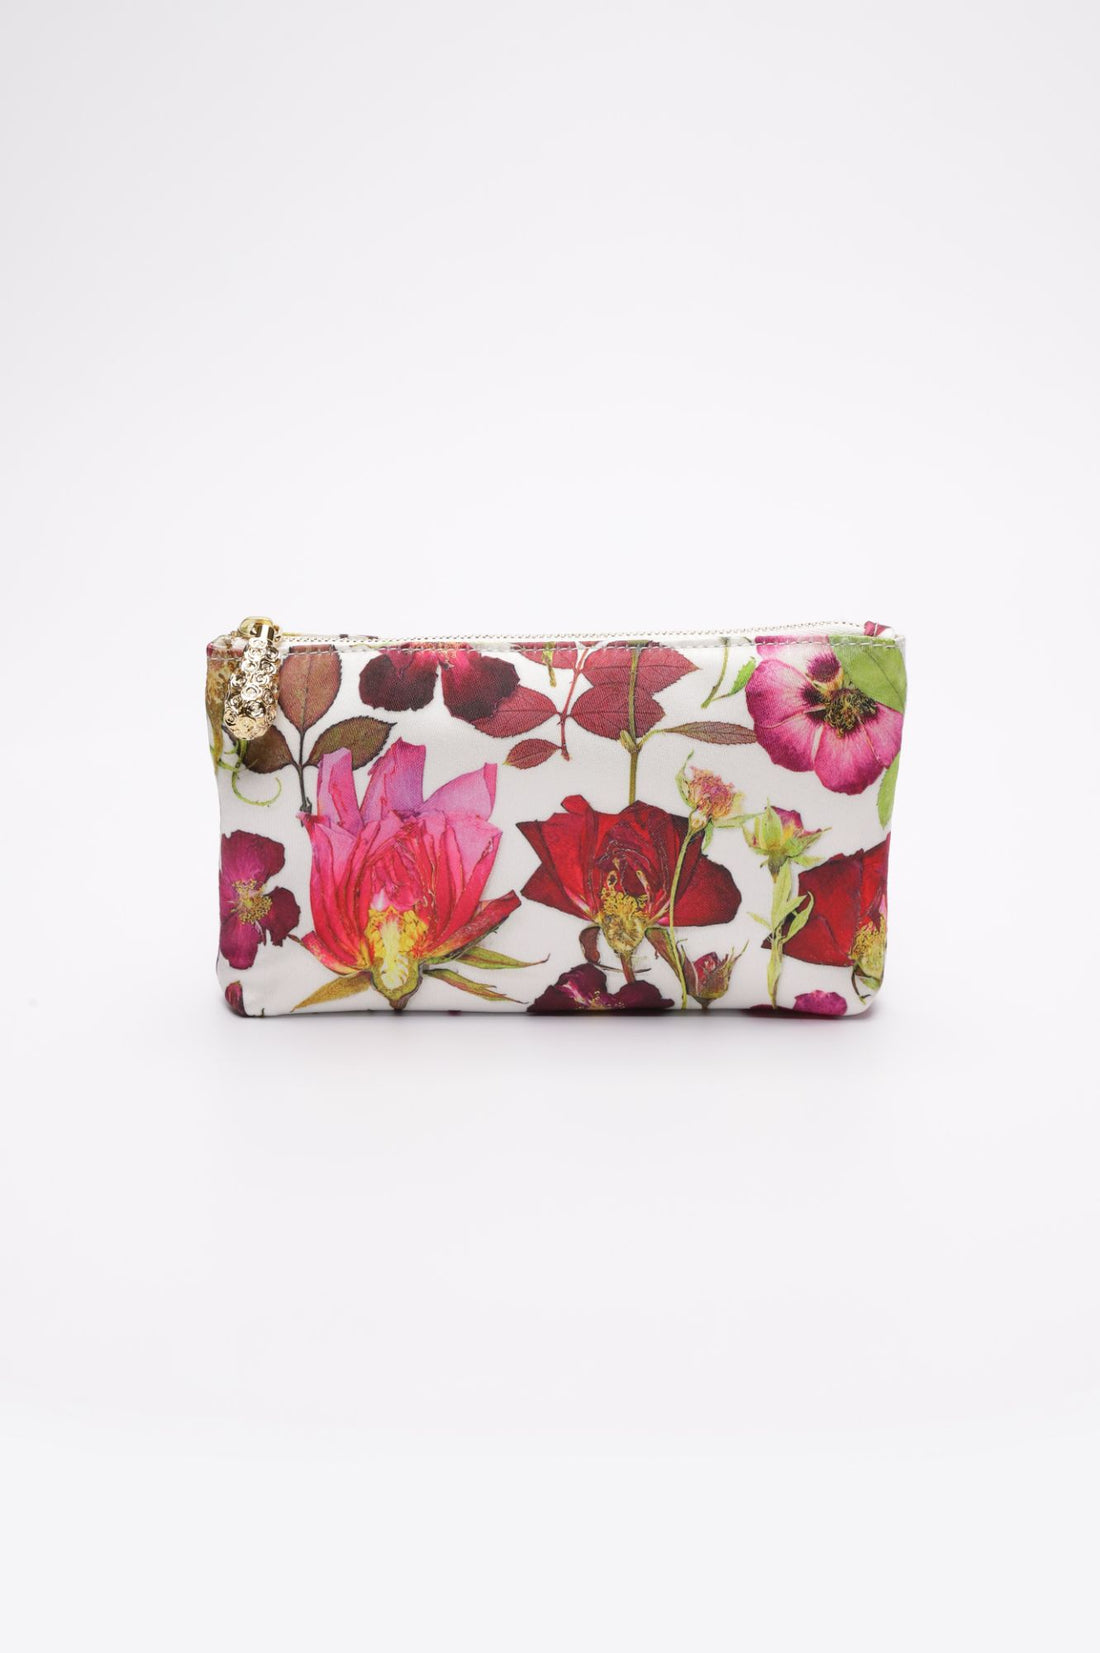 Embroidered Purse Brings Beauty to Concealed Carry